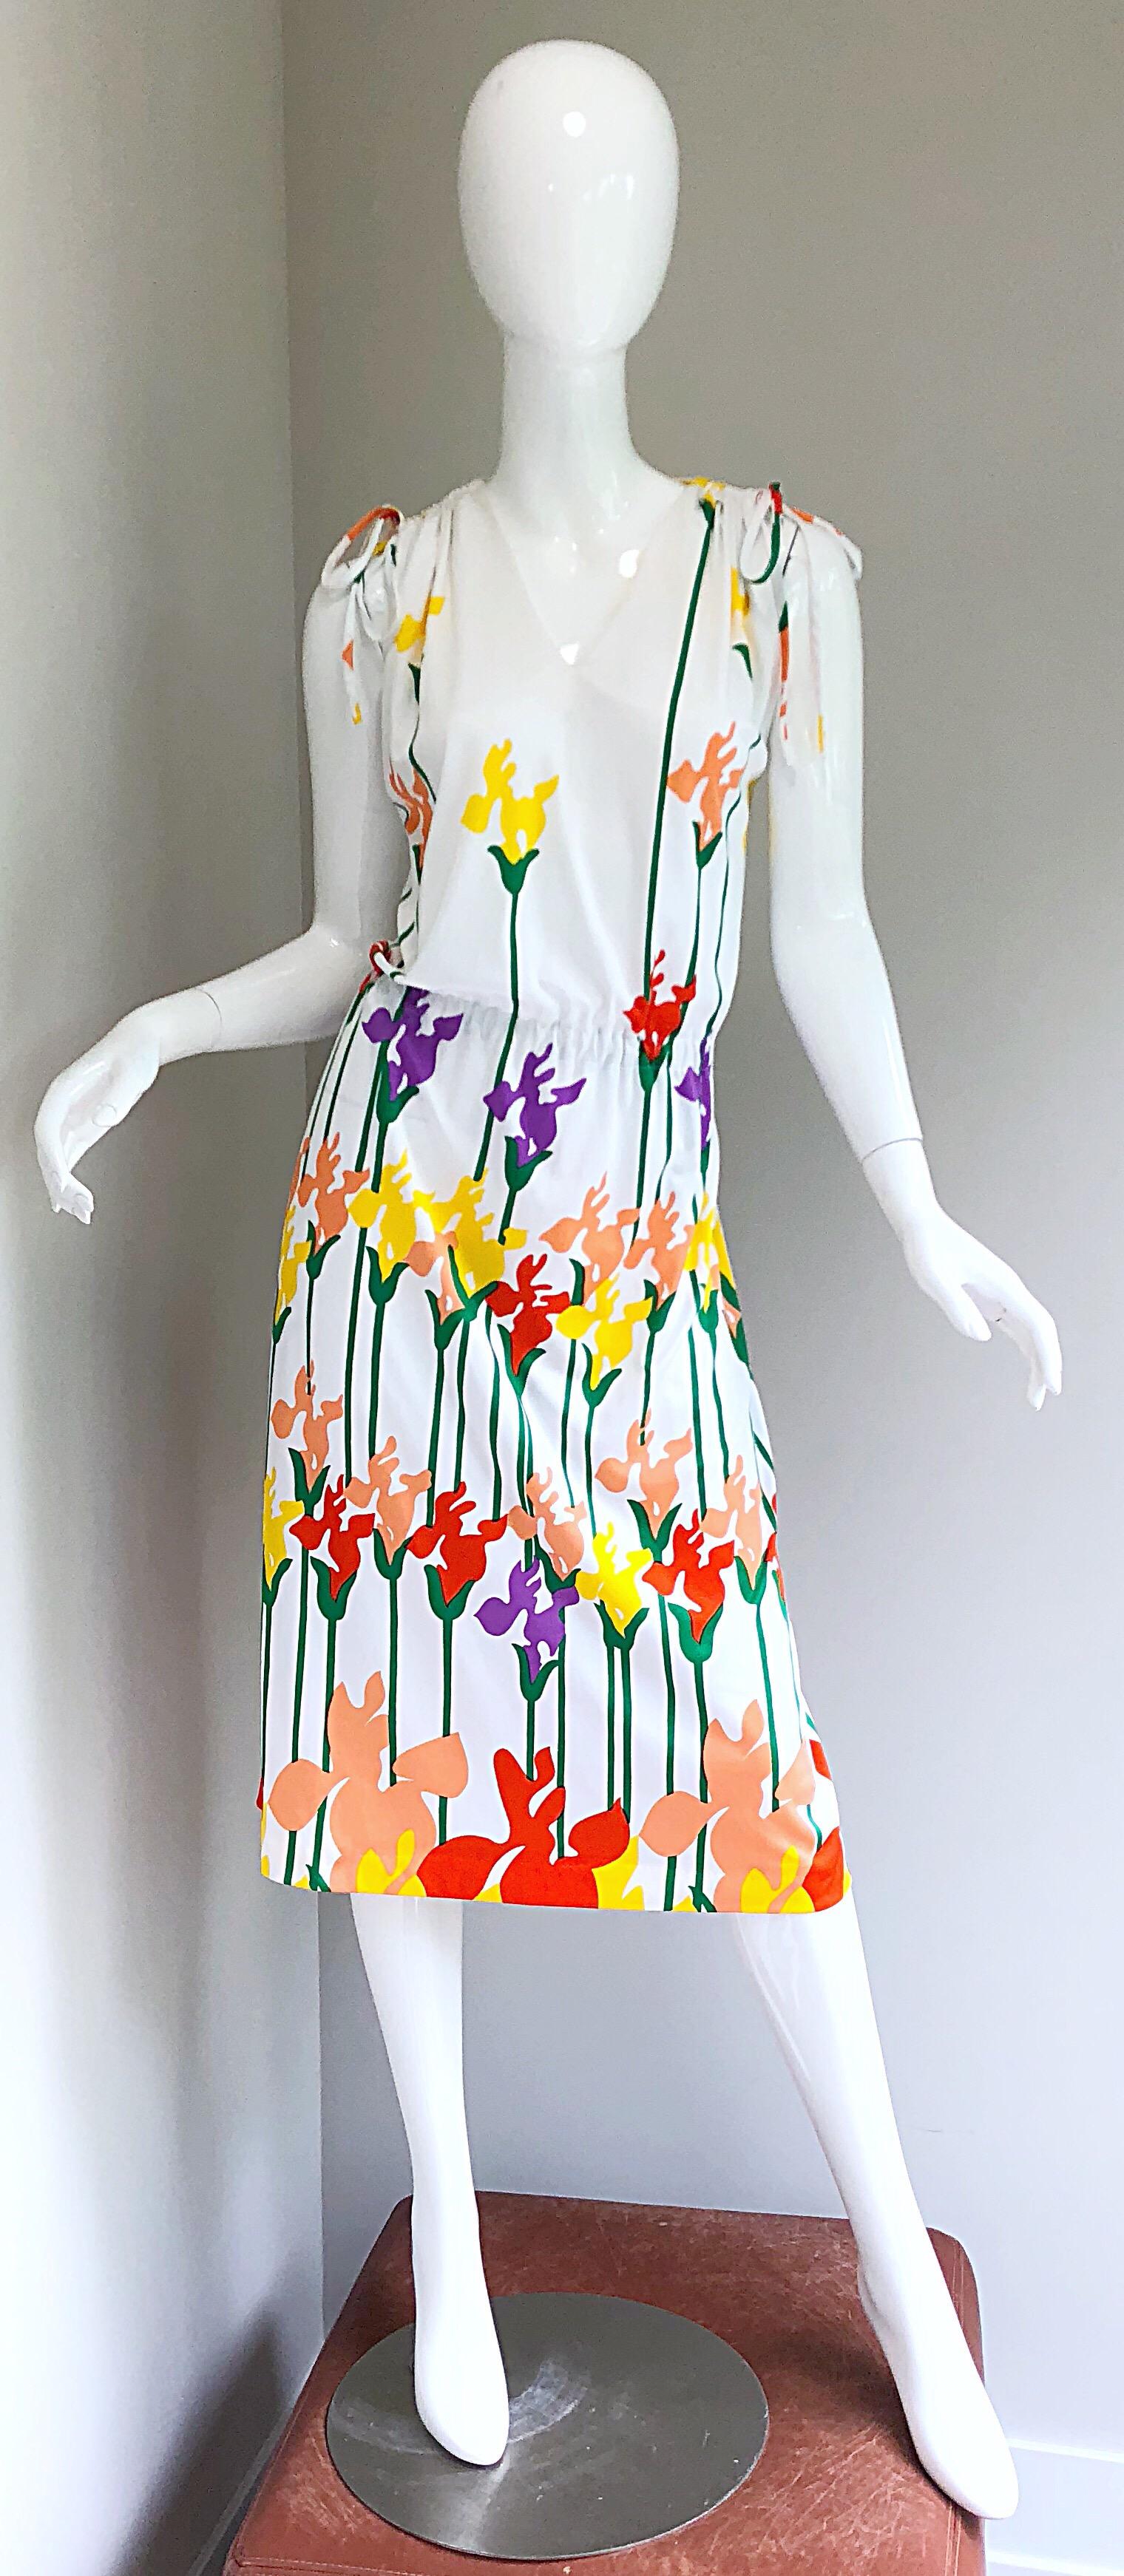 Incredible vintage 1970s LANVIN tulip / butterfly print colorful drawstring dress! Features tulip flowers that look like a cross between a tulip and a butterfly. Elastic waistband and stretch jersey fabric make this rare gem easy to wear by an array